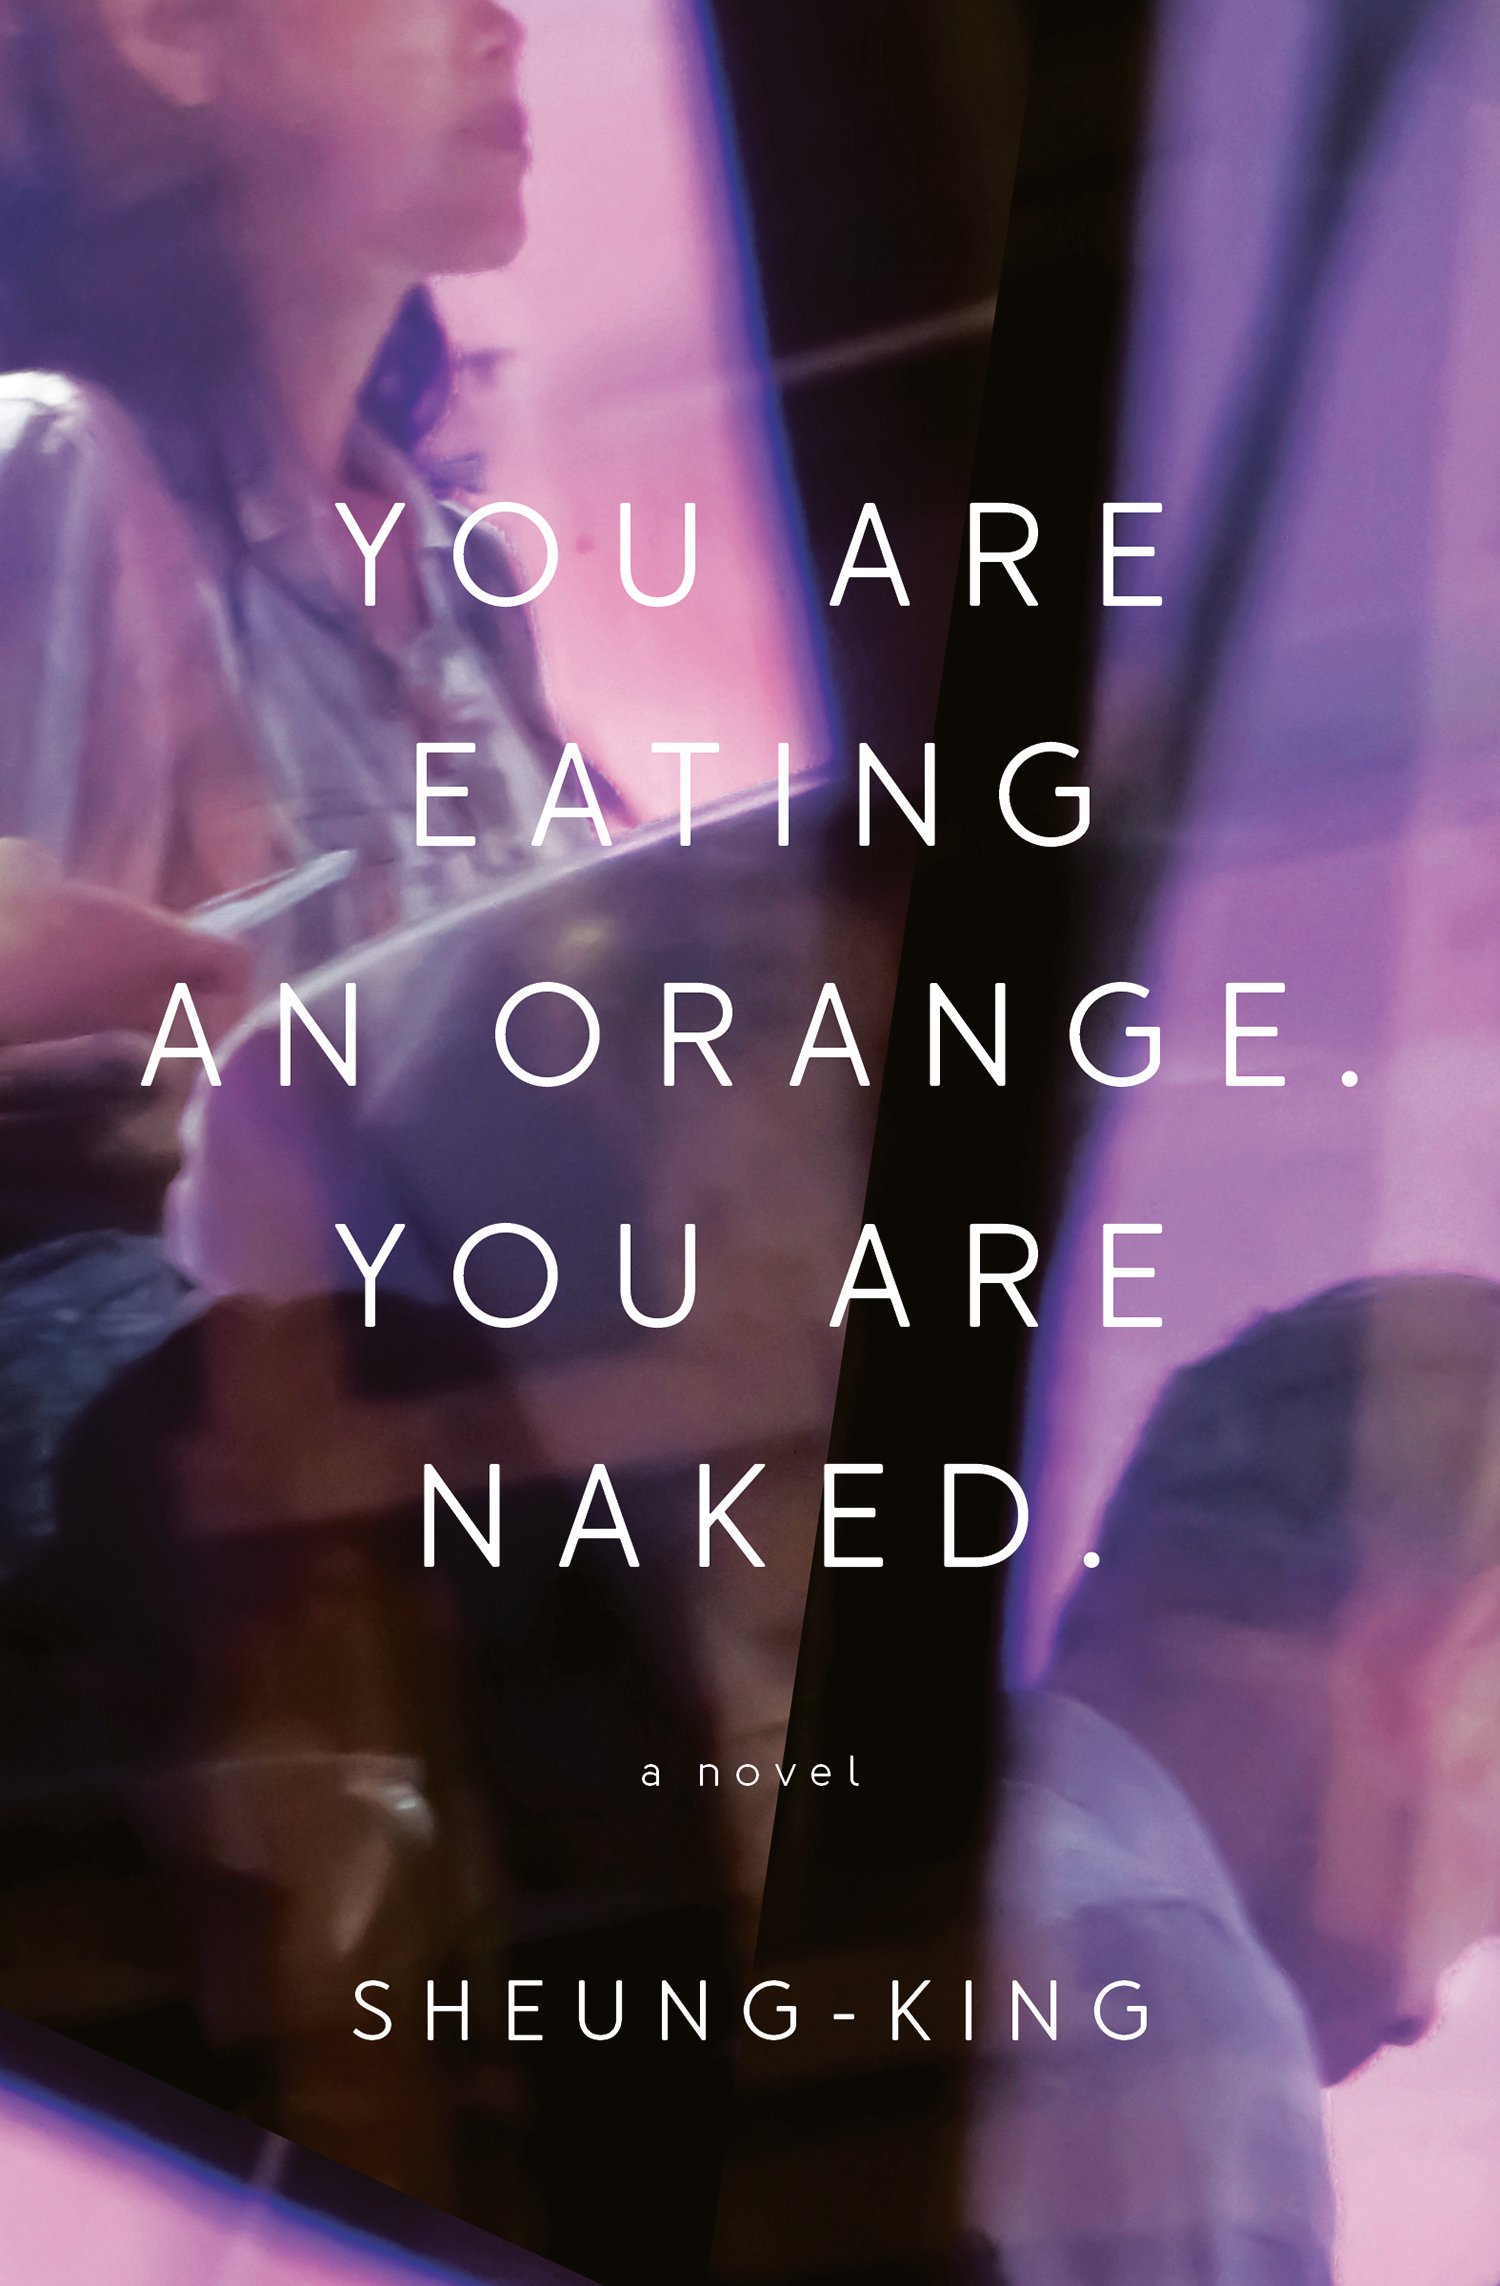 The cover of the book "You Are Eating An Orange. You Are Naked."